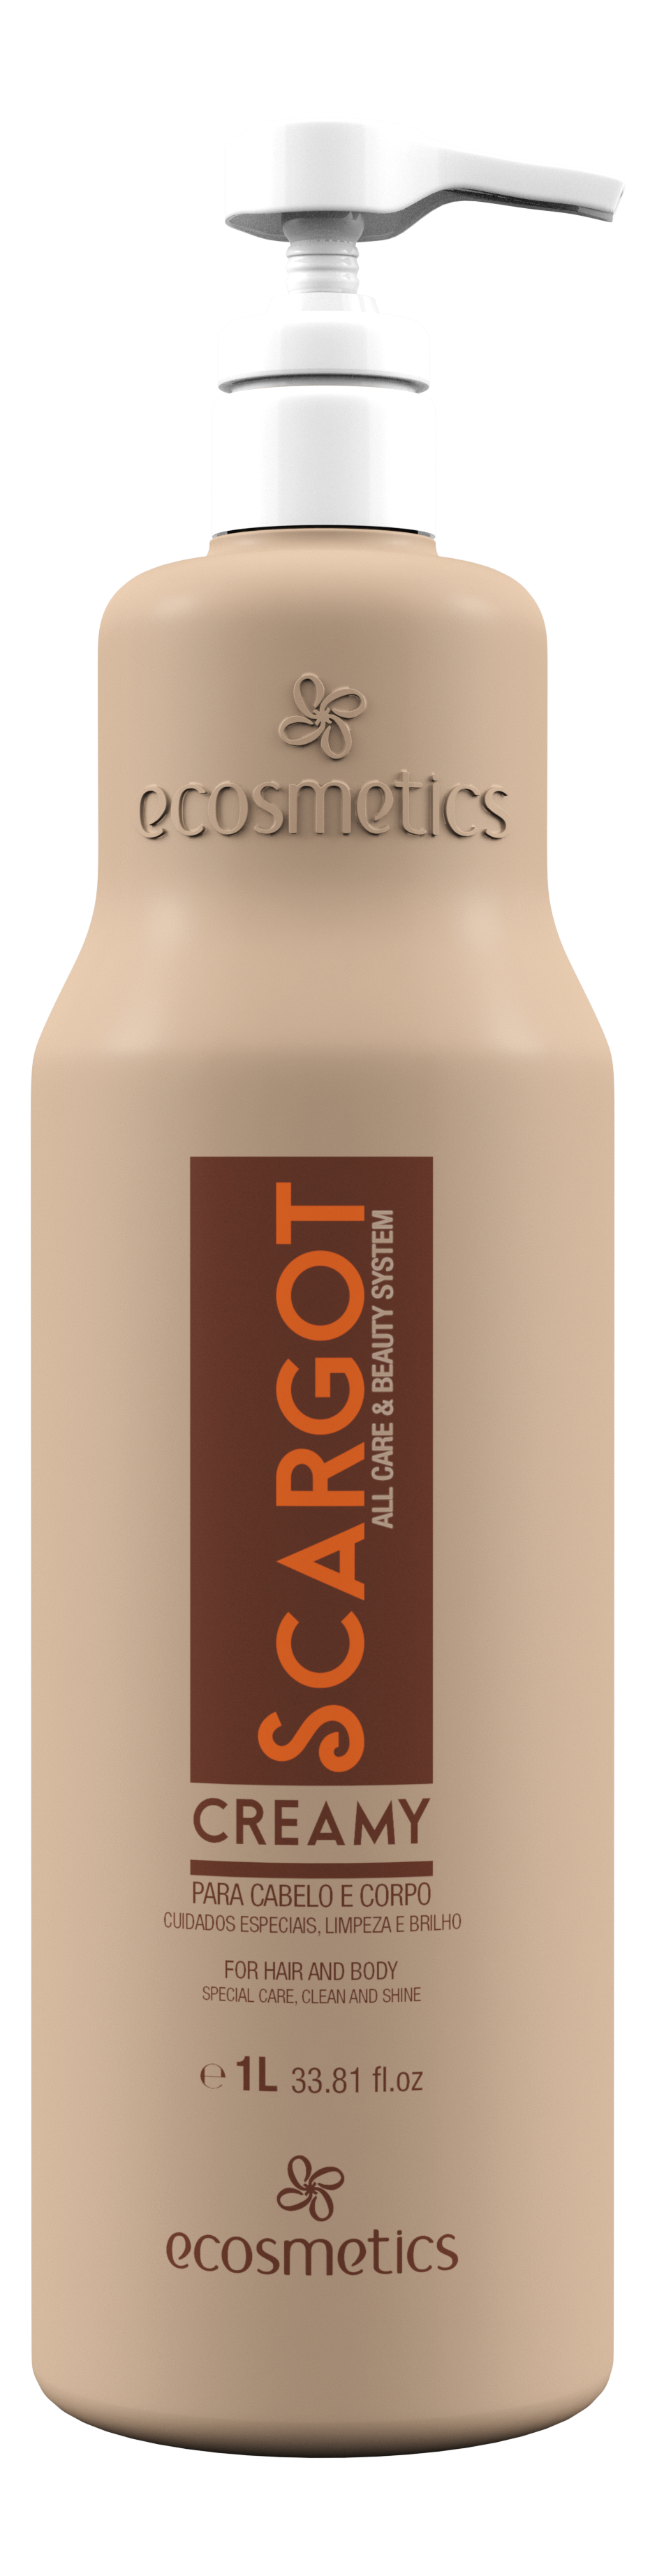 SCARGOT CREAMY (1L AND 250ML)